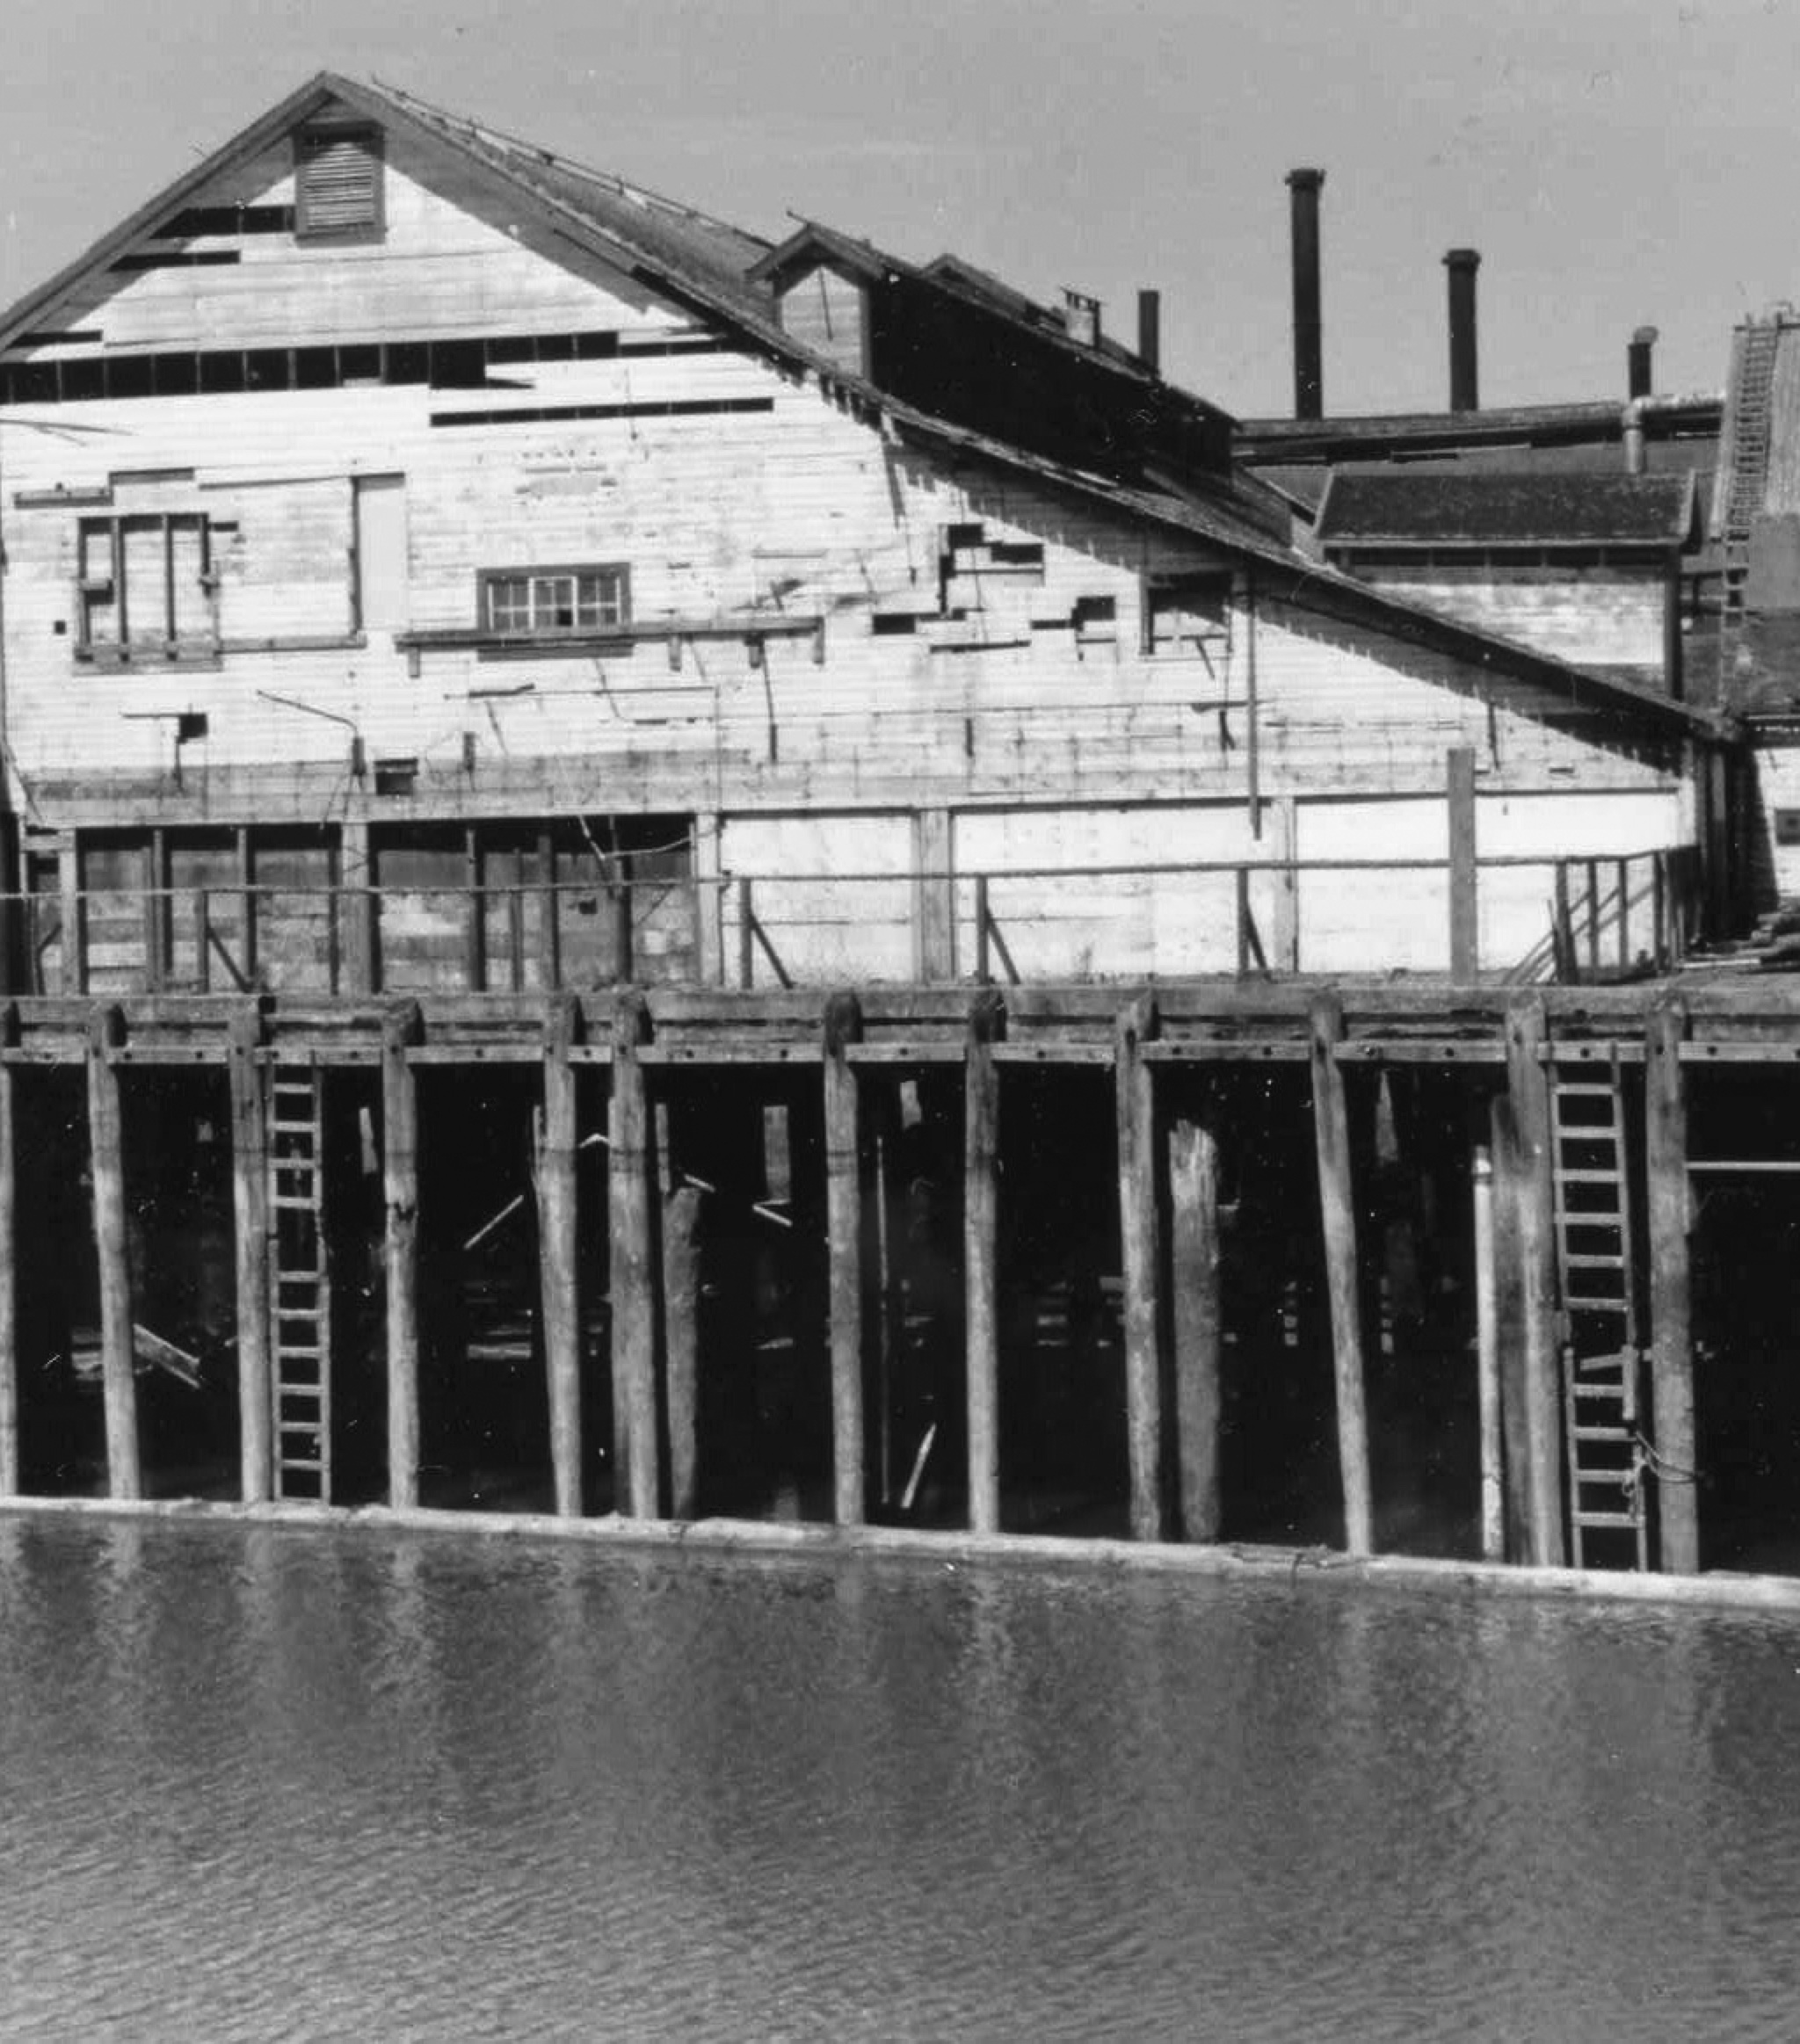 Cannery exterior viewed from the water showing pilings underneath